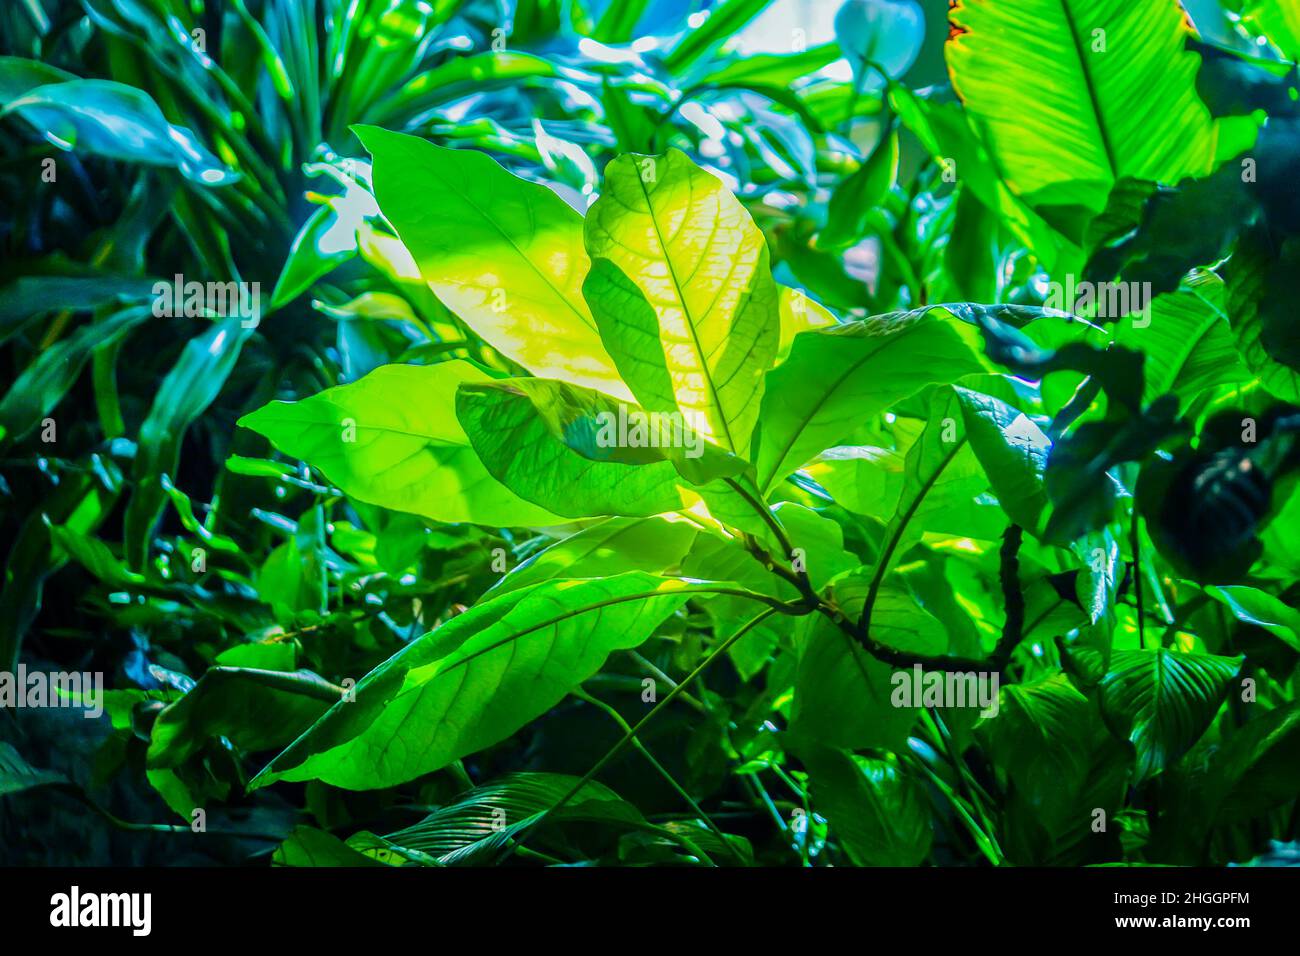 Tropical leaves in sunlight close up. Green foliage nature background. Stock Photo